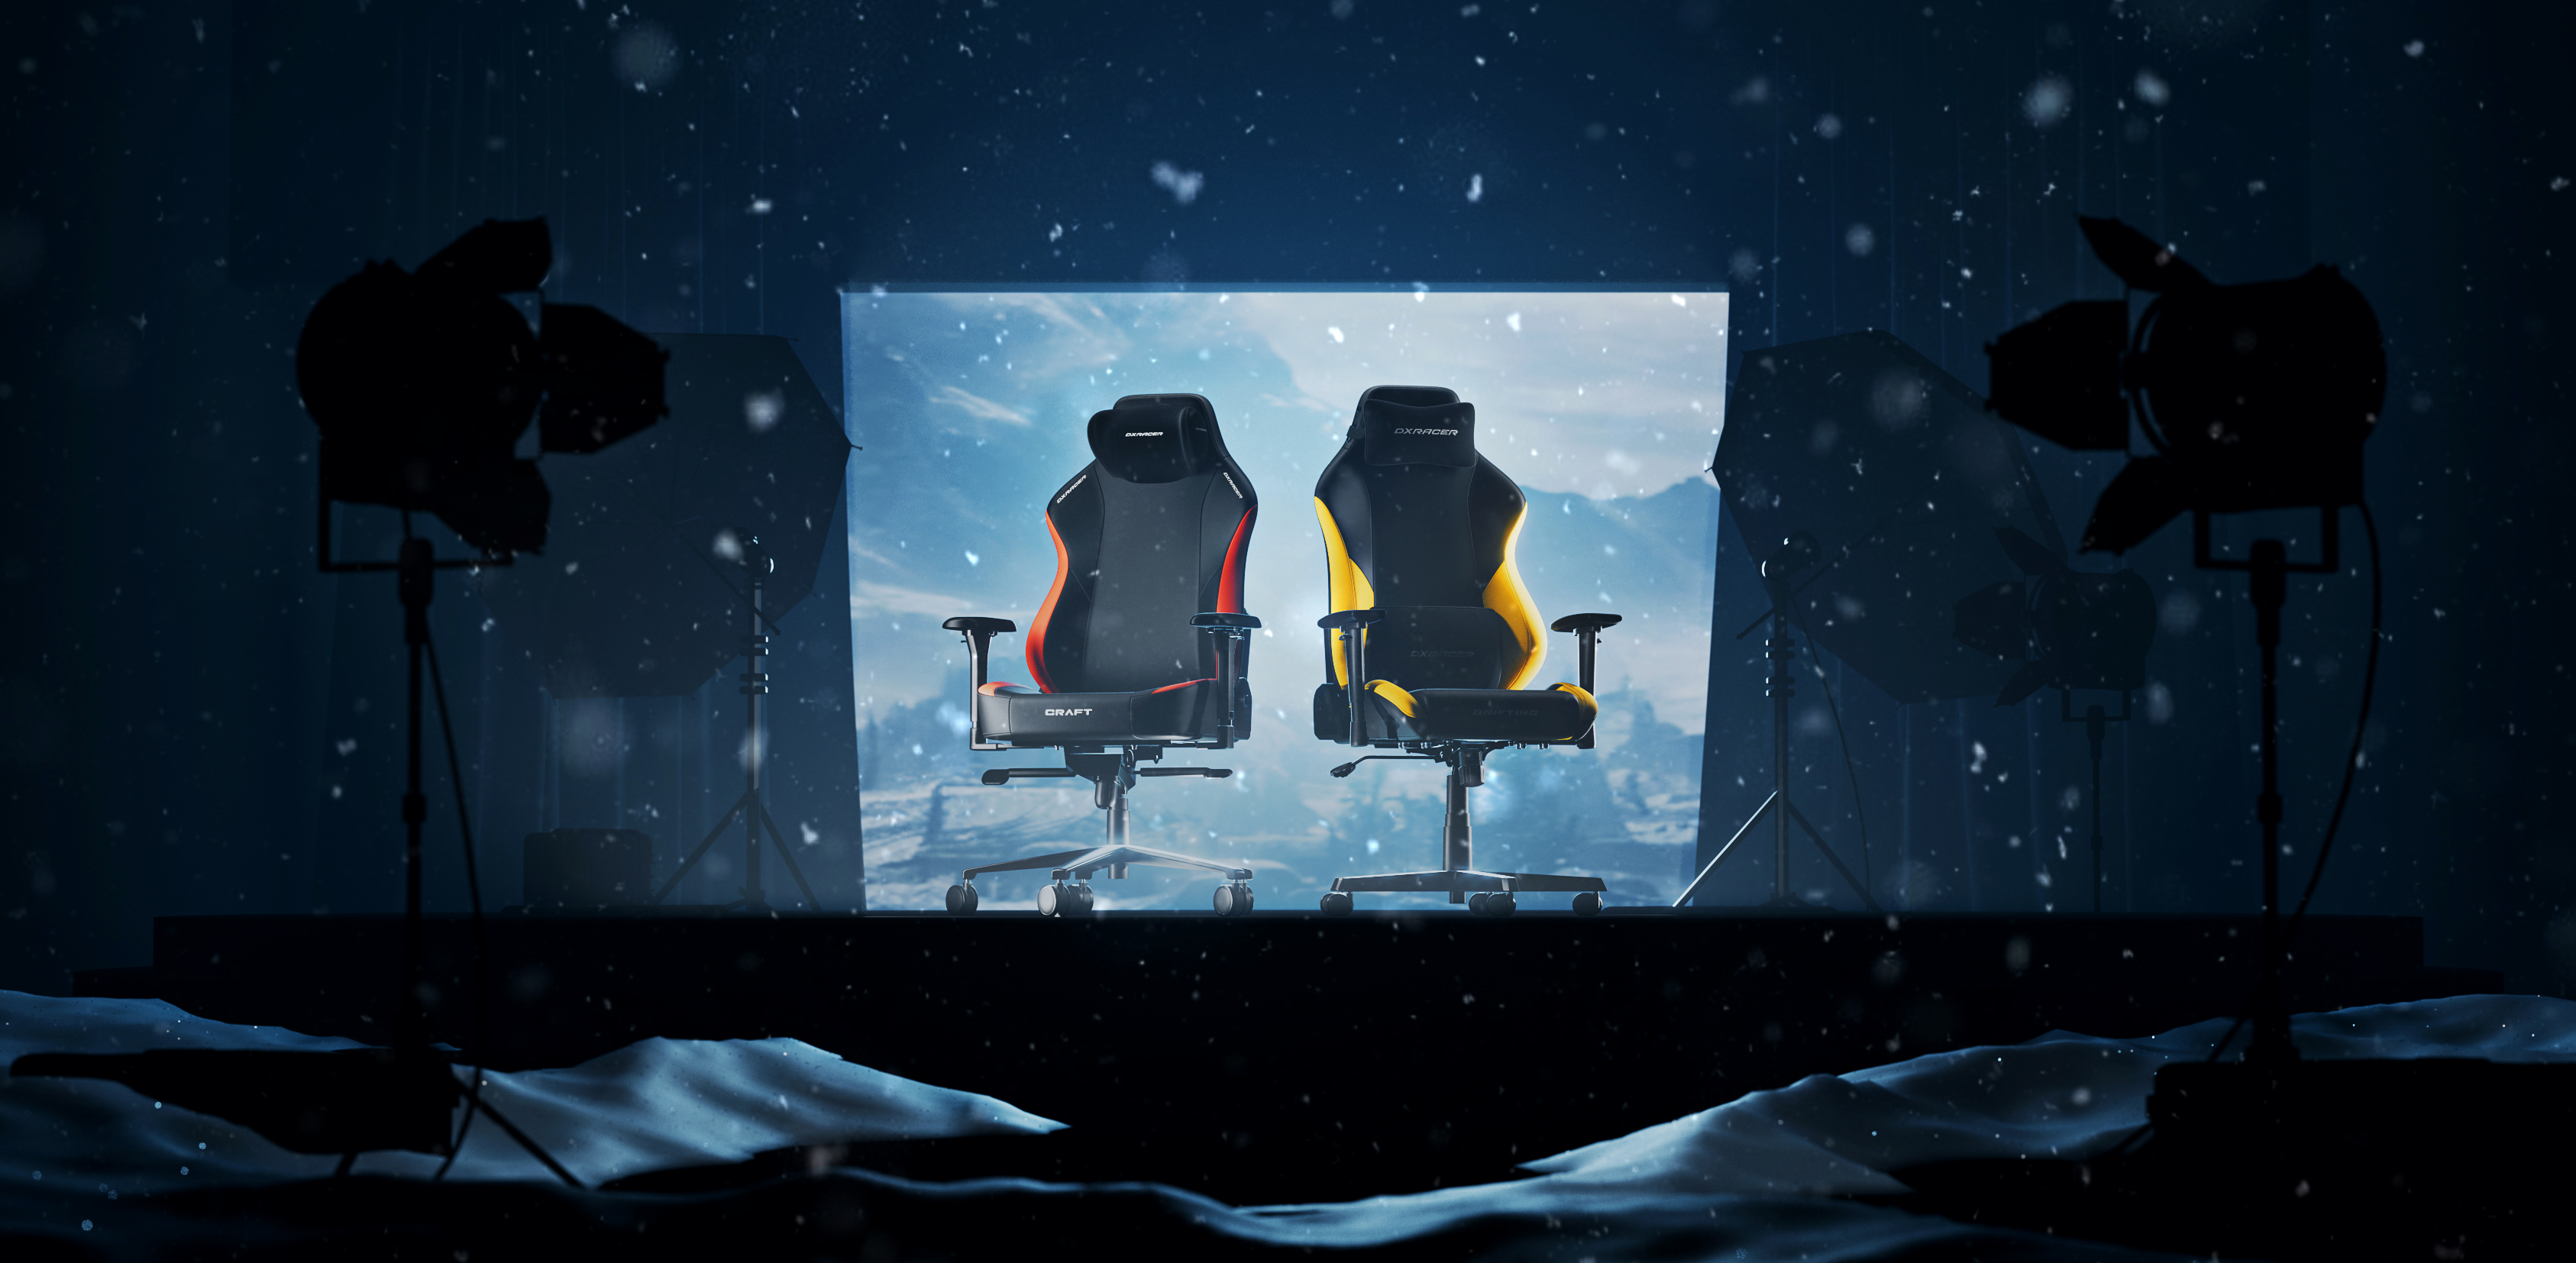 Computer chairs for Gamers   - Official®